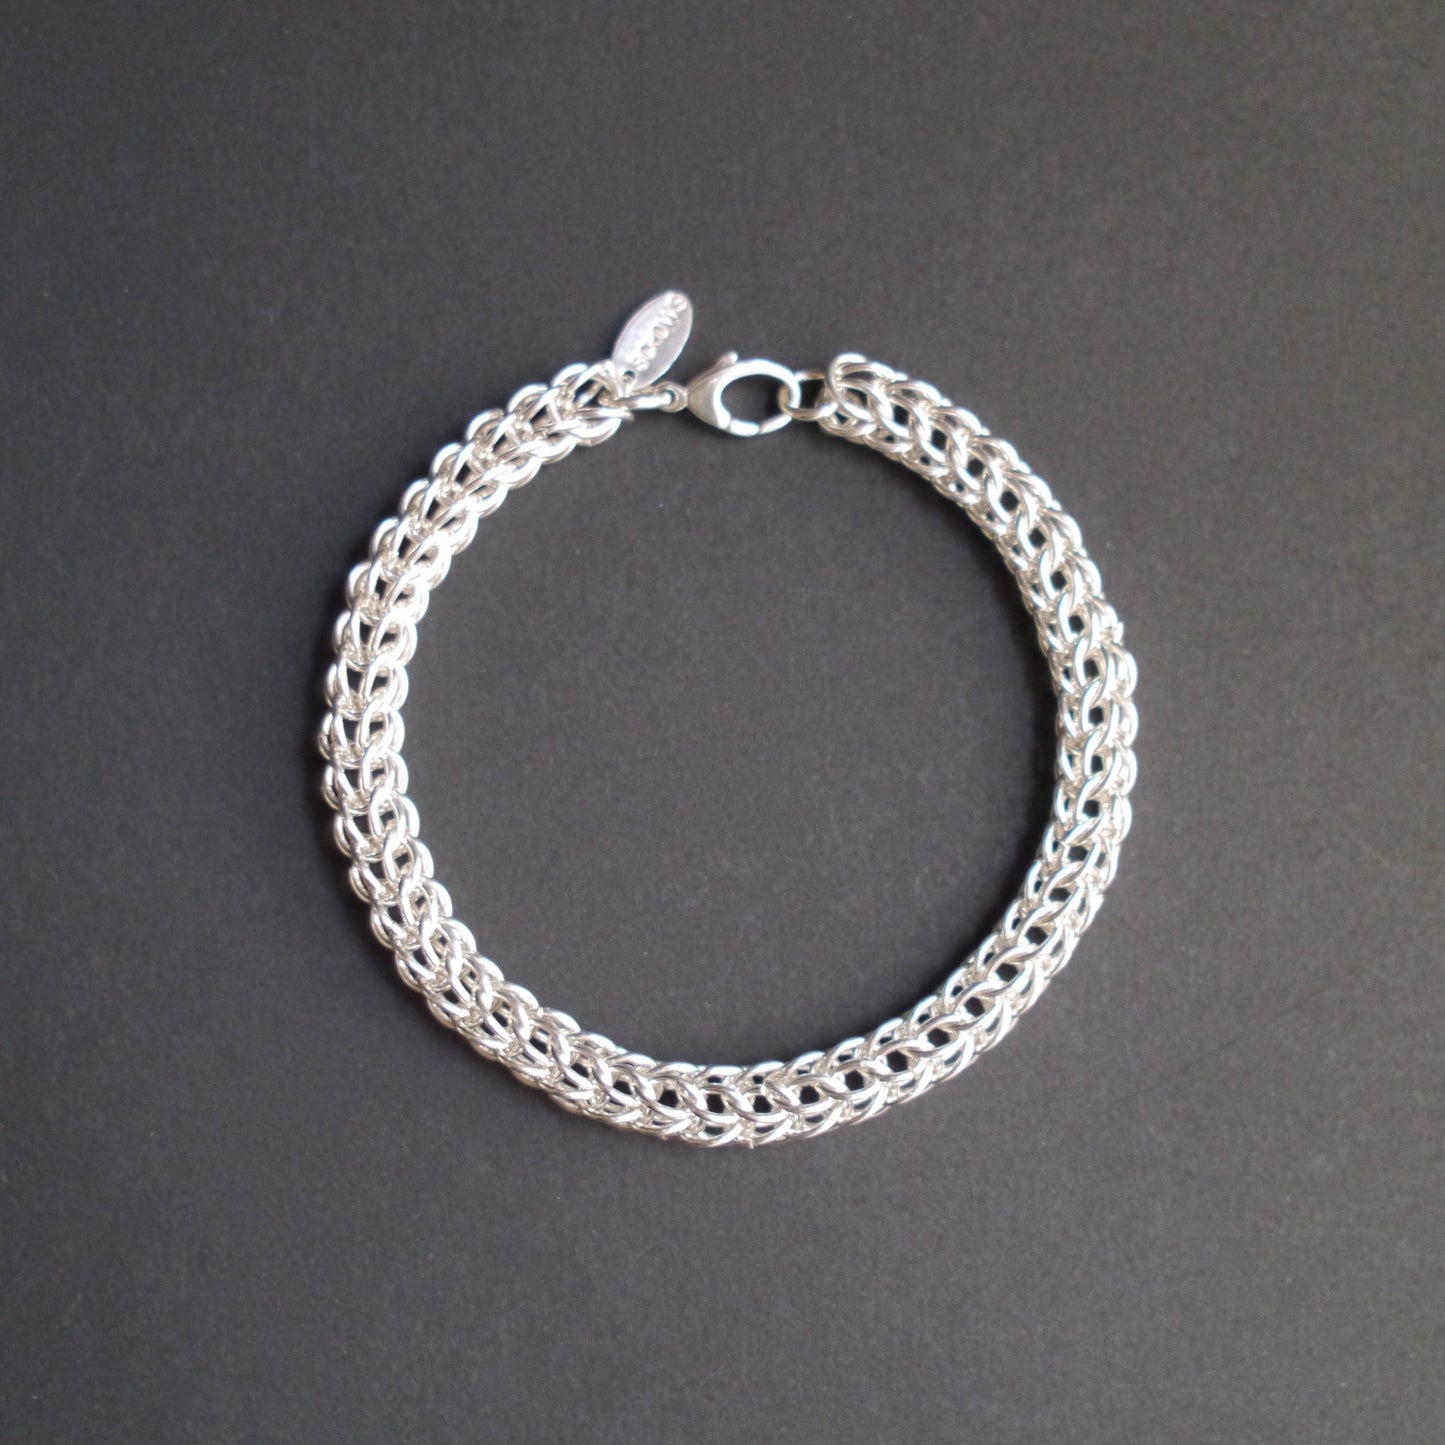 8mm Full Persian Chainmaille Bracelet in Sterling Silver